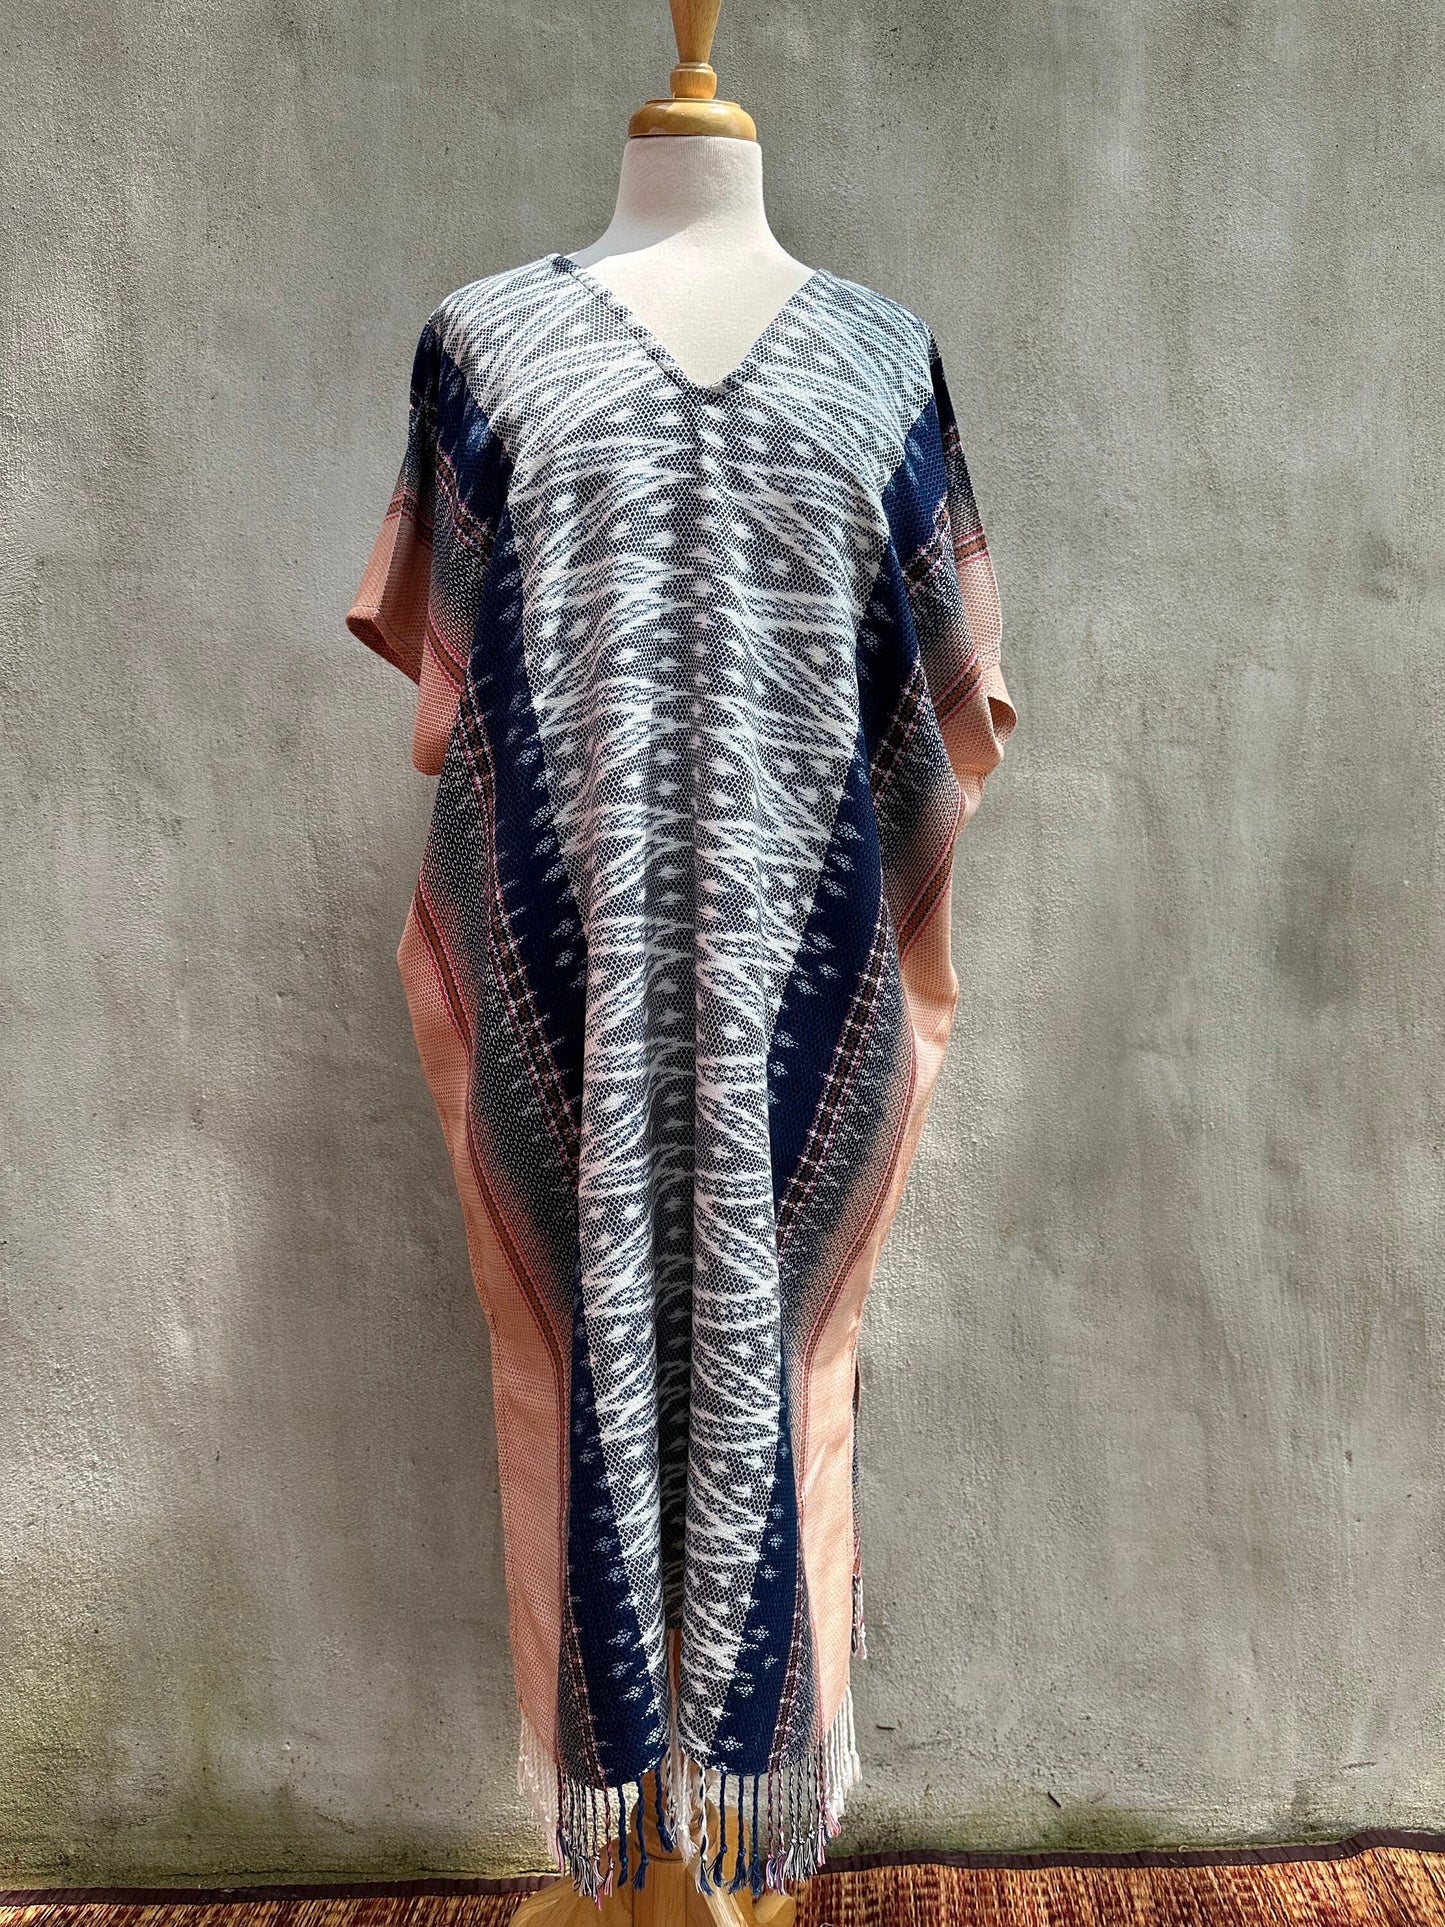 MALA handworks  Ikat Hand Woven Pattern Kaftan in Indigo Blue with Salmon Pink and White